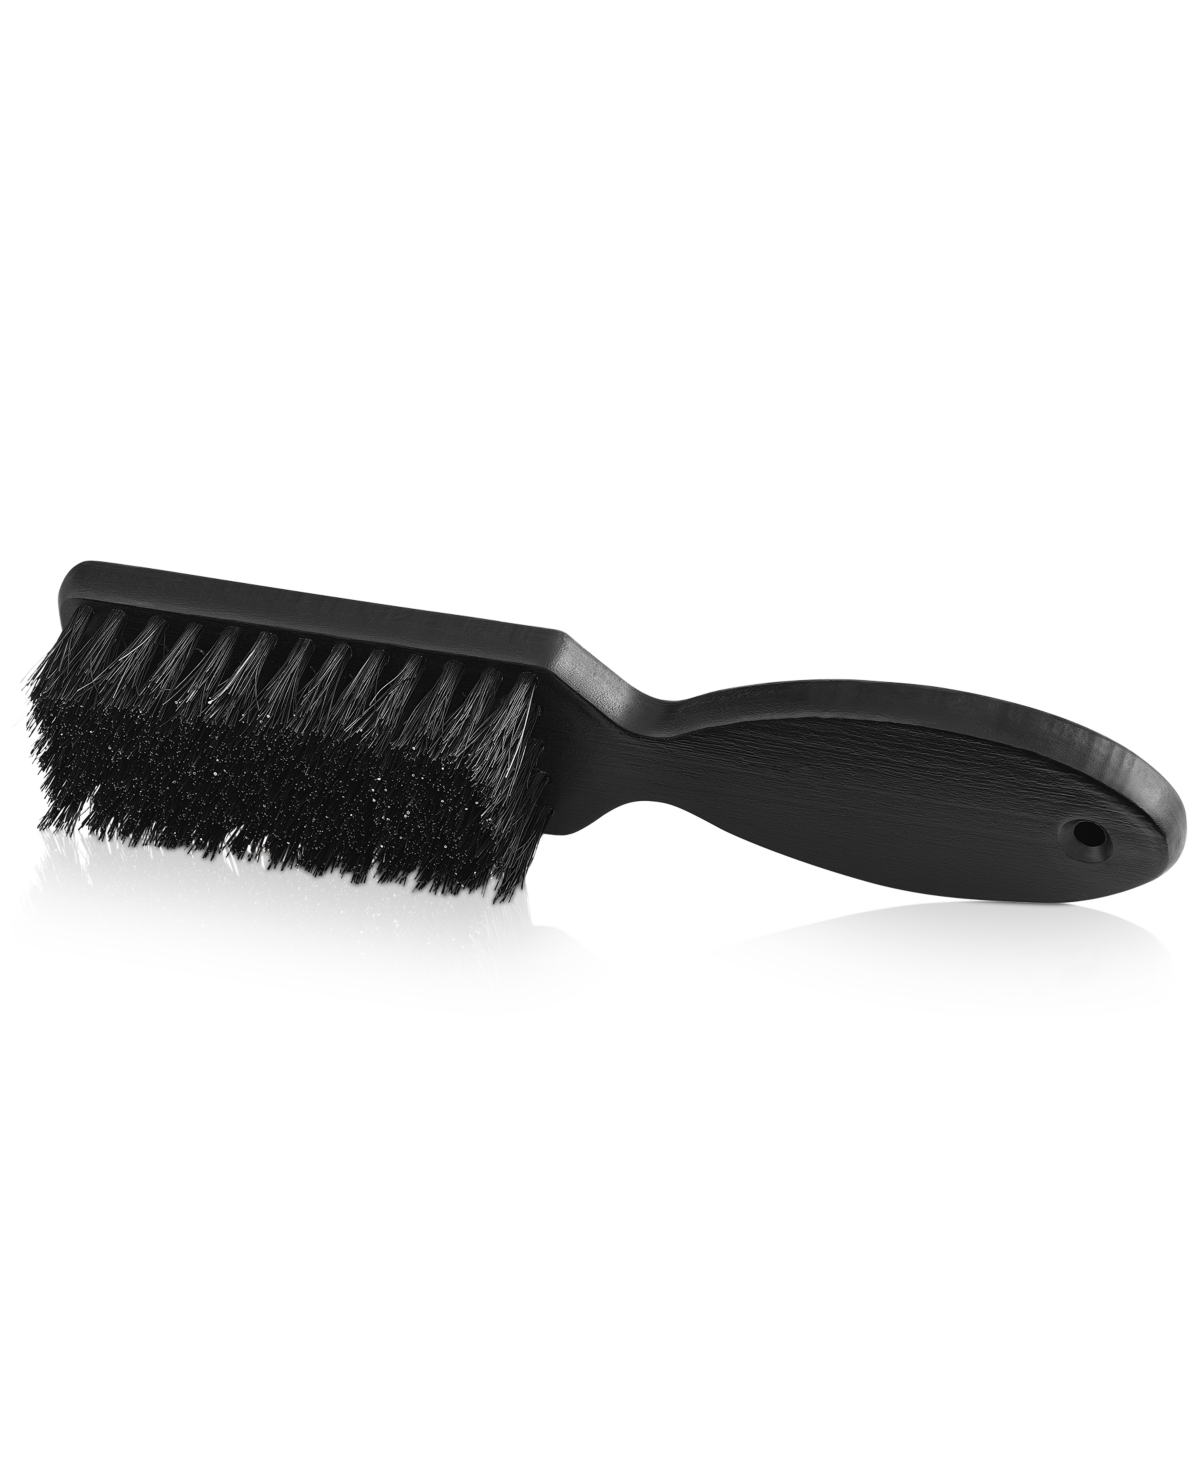 Barber Fading & Cleaning Brush